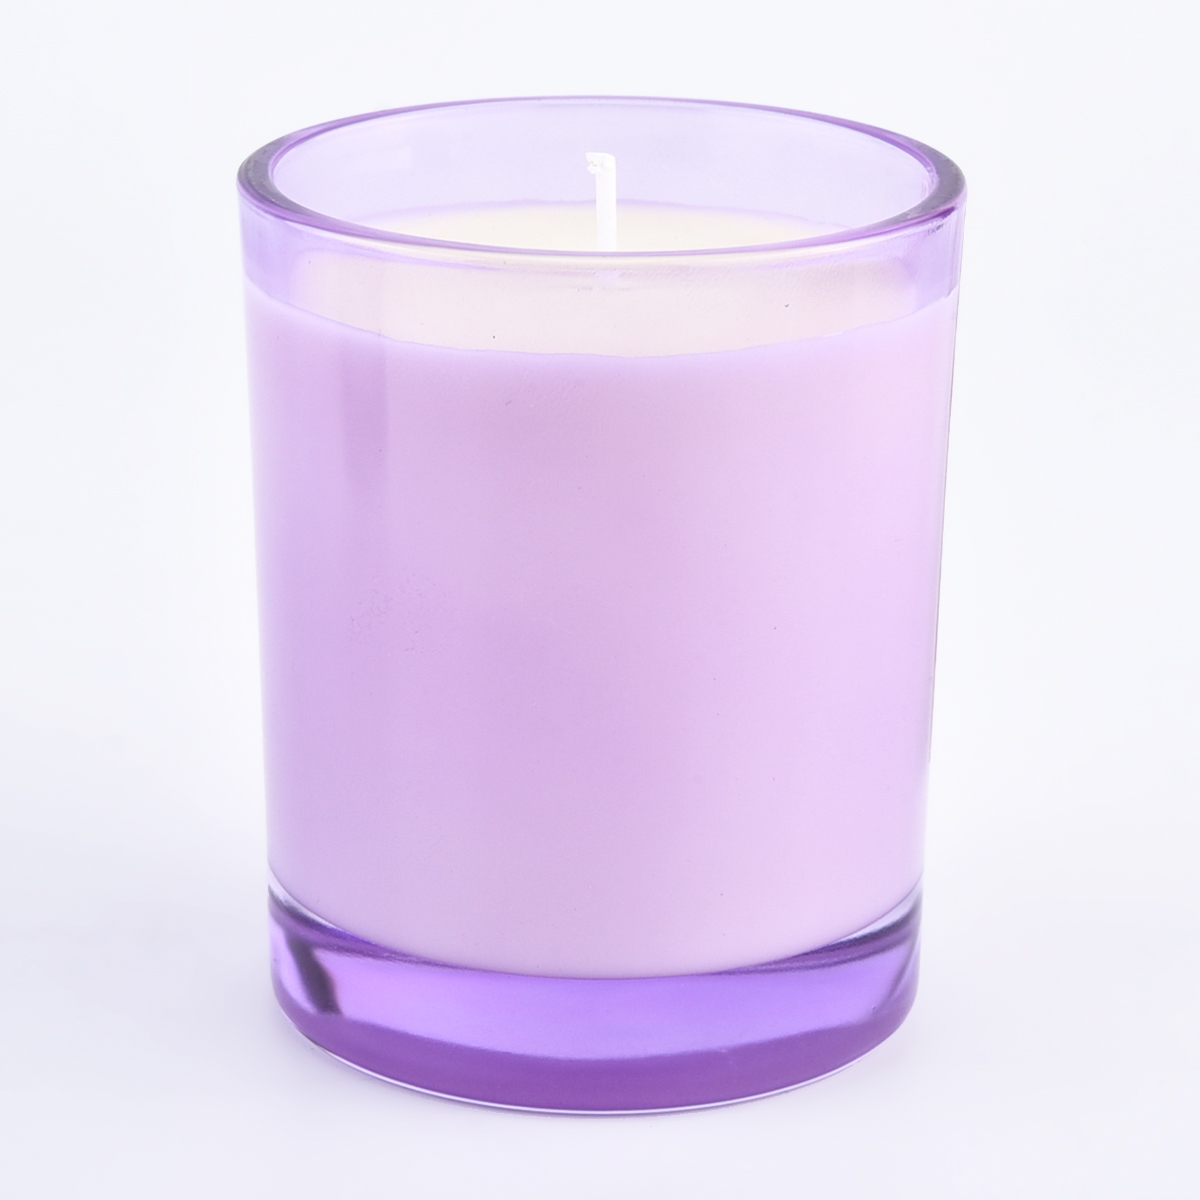 popular solid color glass vessels for candles